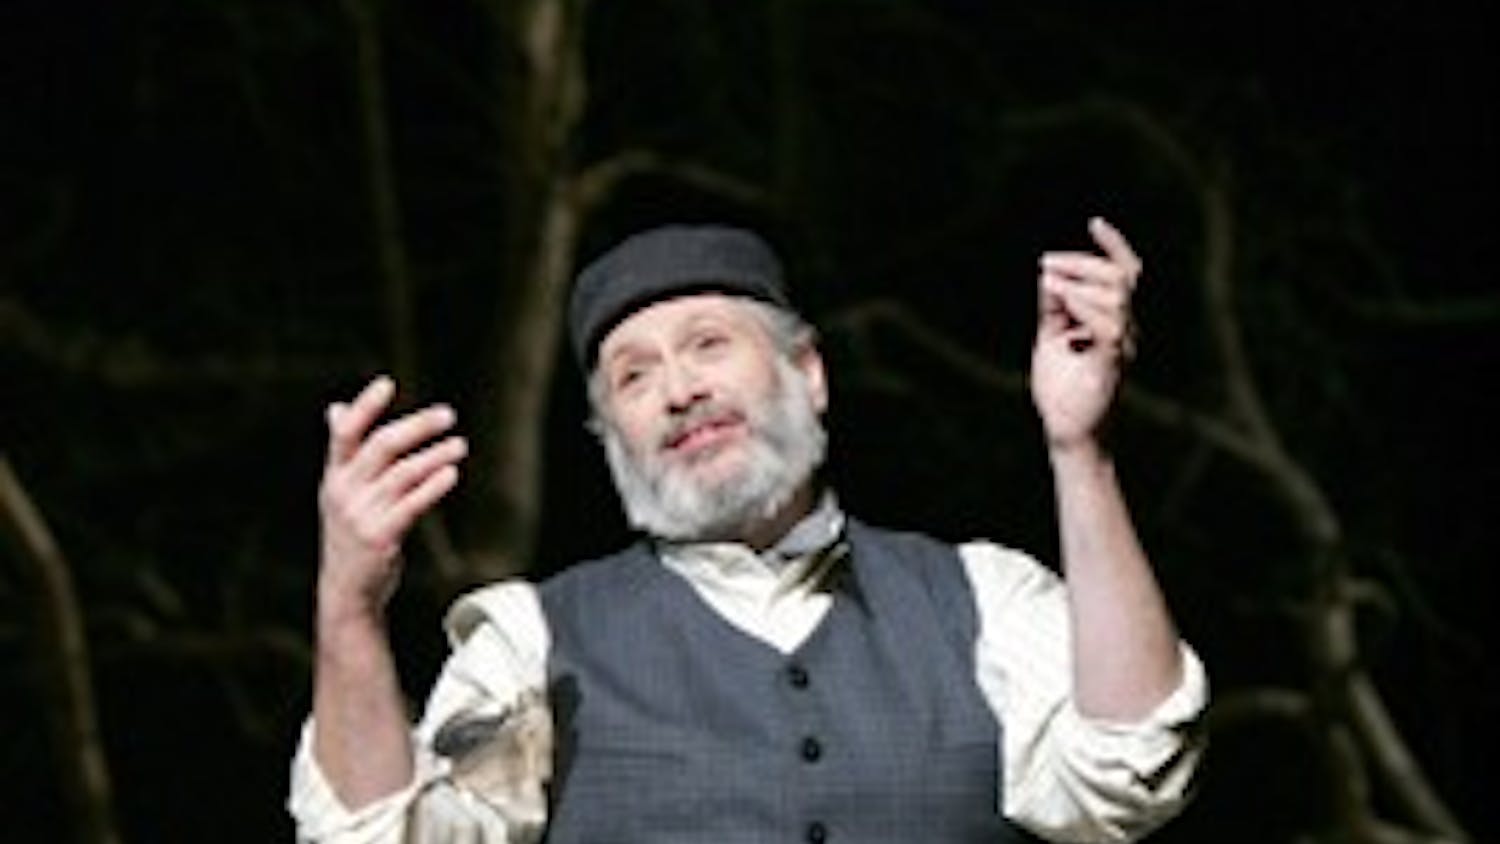 THE ROOF IS ON FIERSTEIN â€” Broadway star Harvey Fierstein is bringing his experience and prestige to D.C.â€™s National Theatre in his role as Tevye in â€œFiddler on the Roof.â€ The musical runs through May 2.